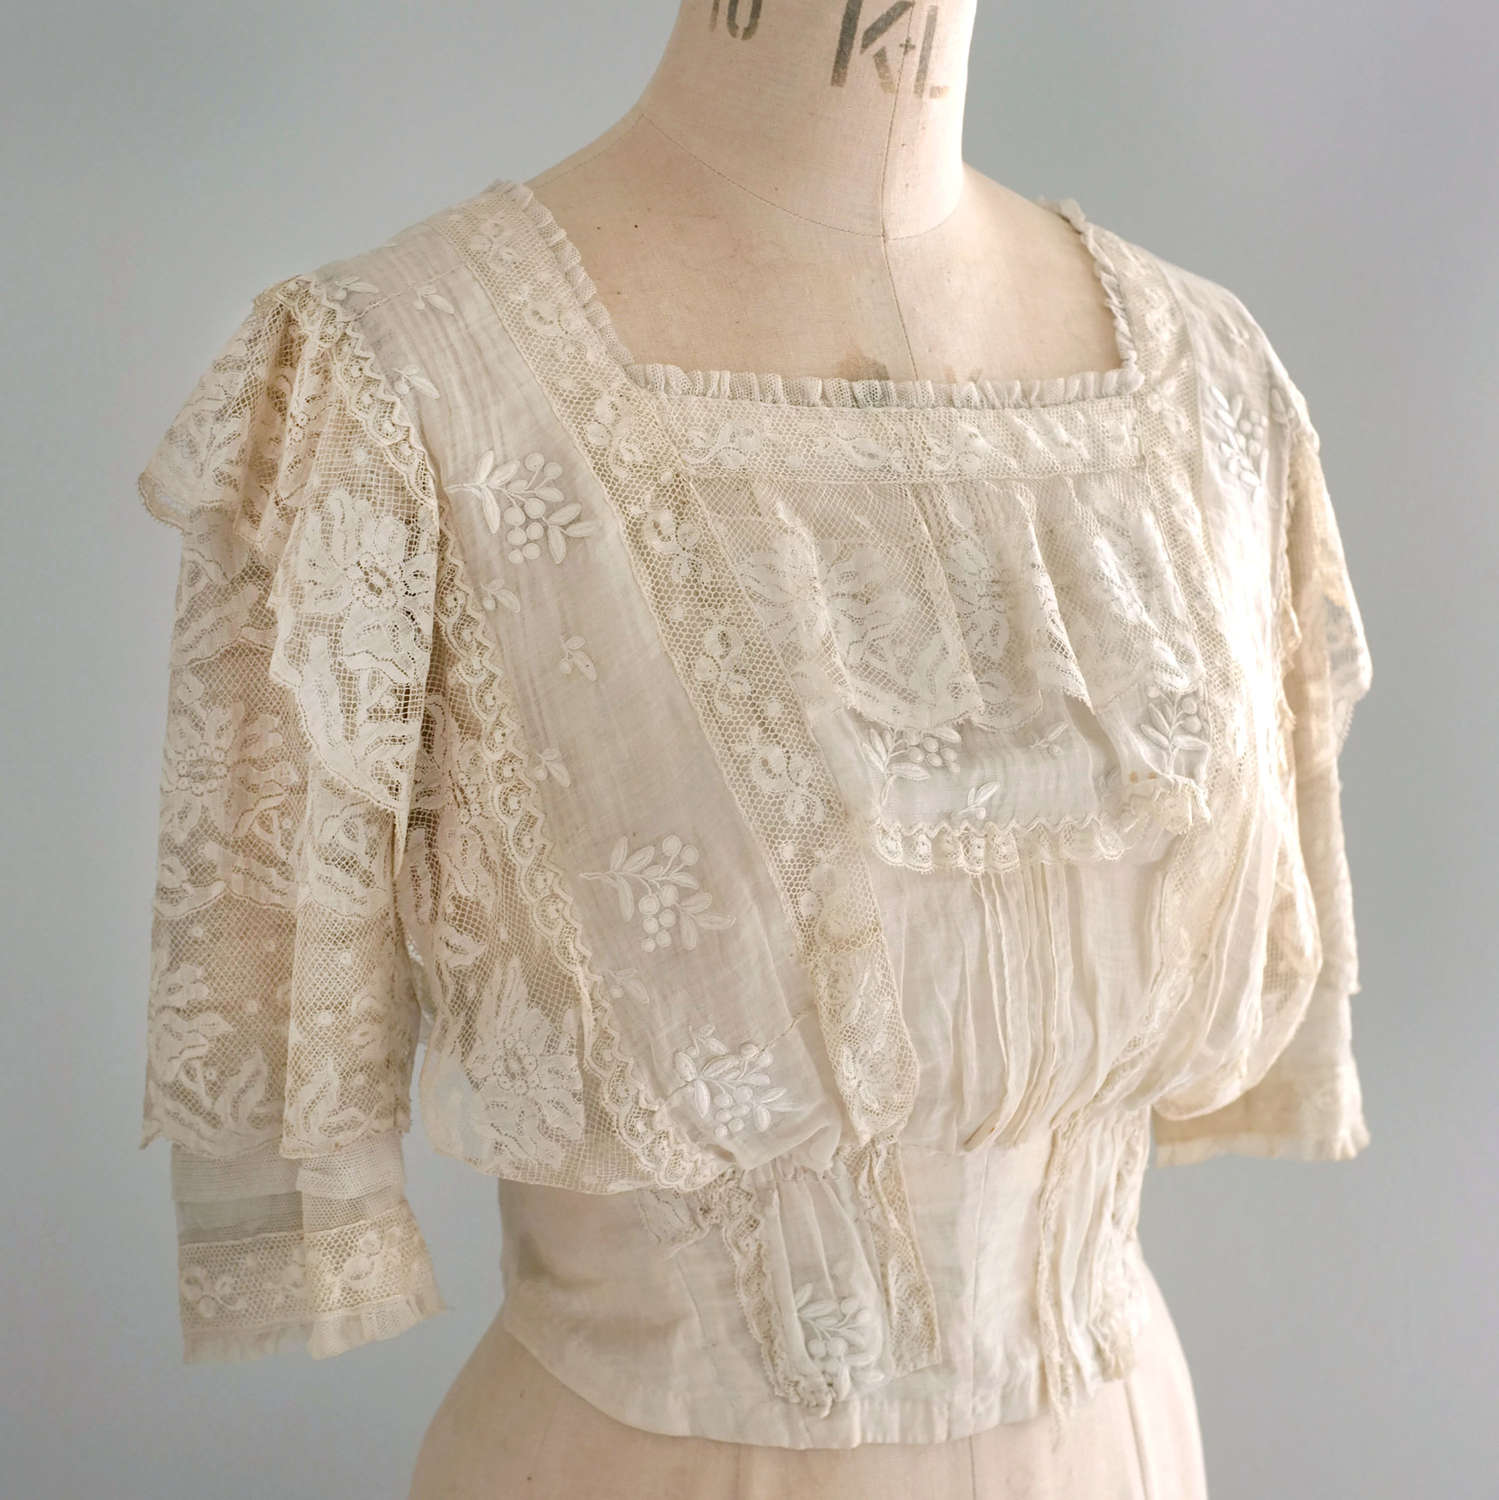 Antique French Cotton and Lace Summer Bodice